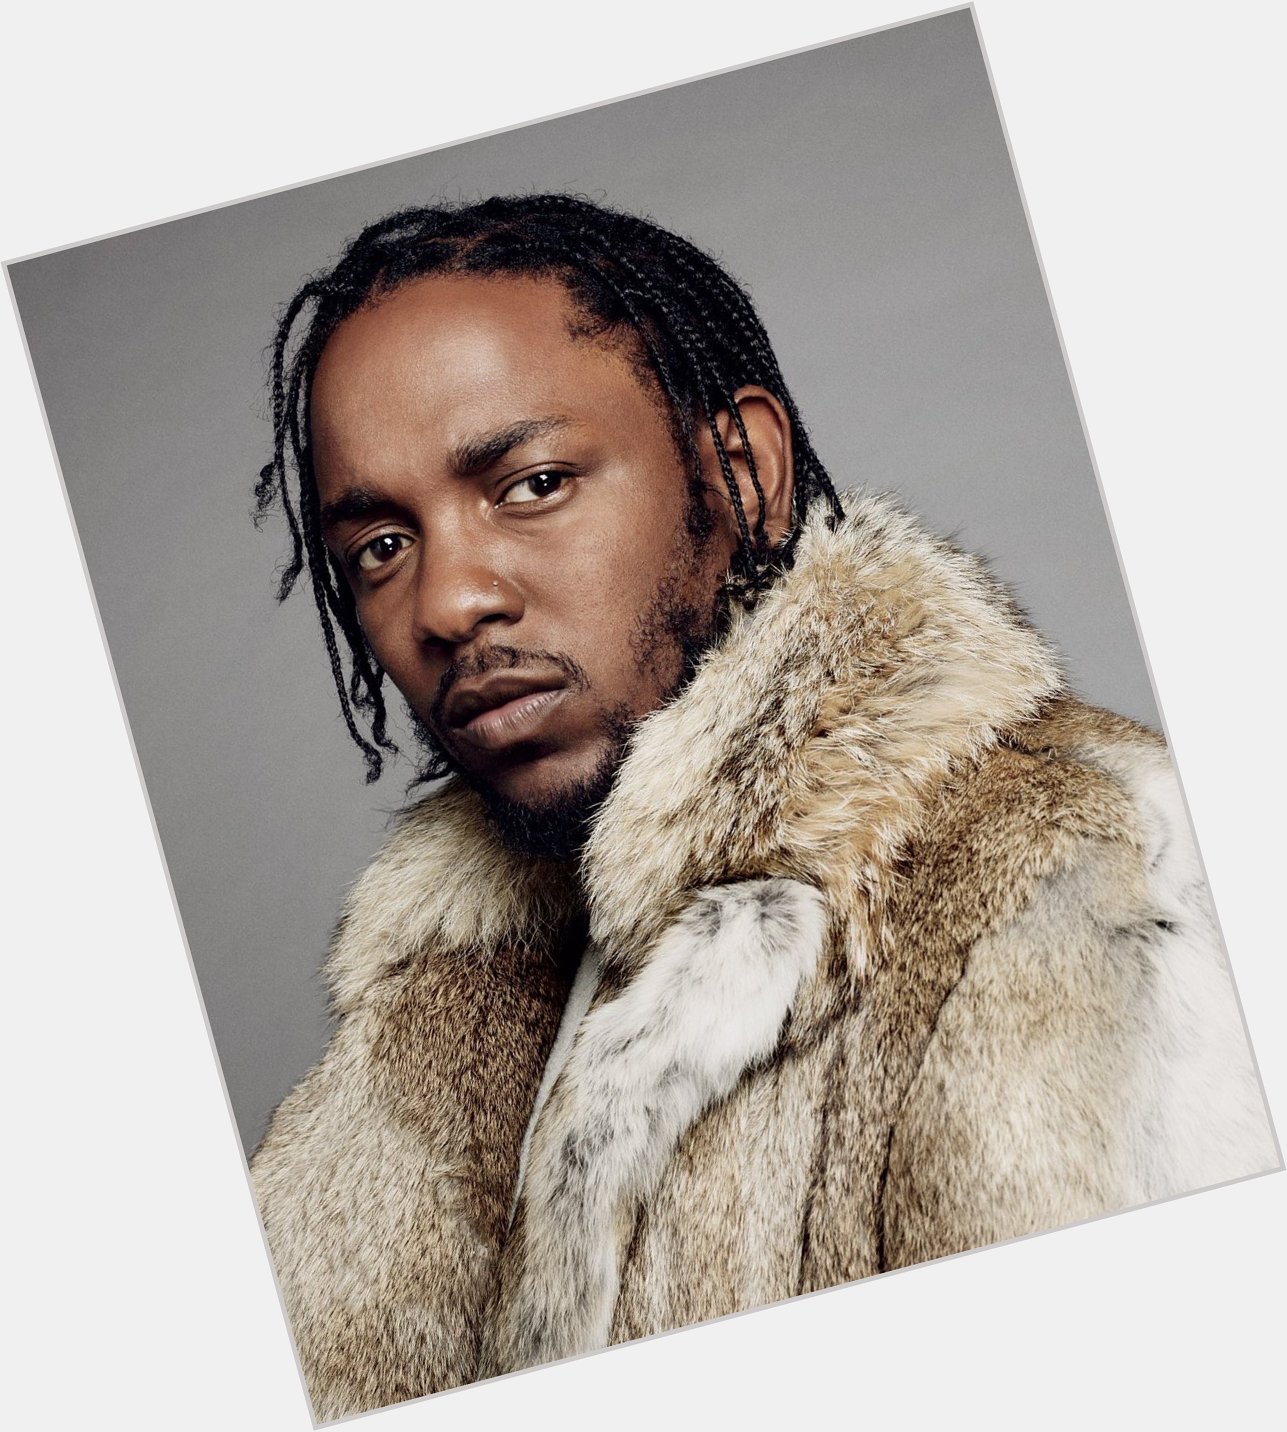 Happy birthday to one of the greatest rappers alive a living legend Kendrick Lamar 